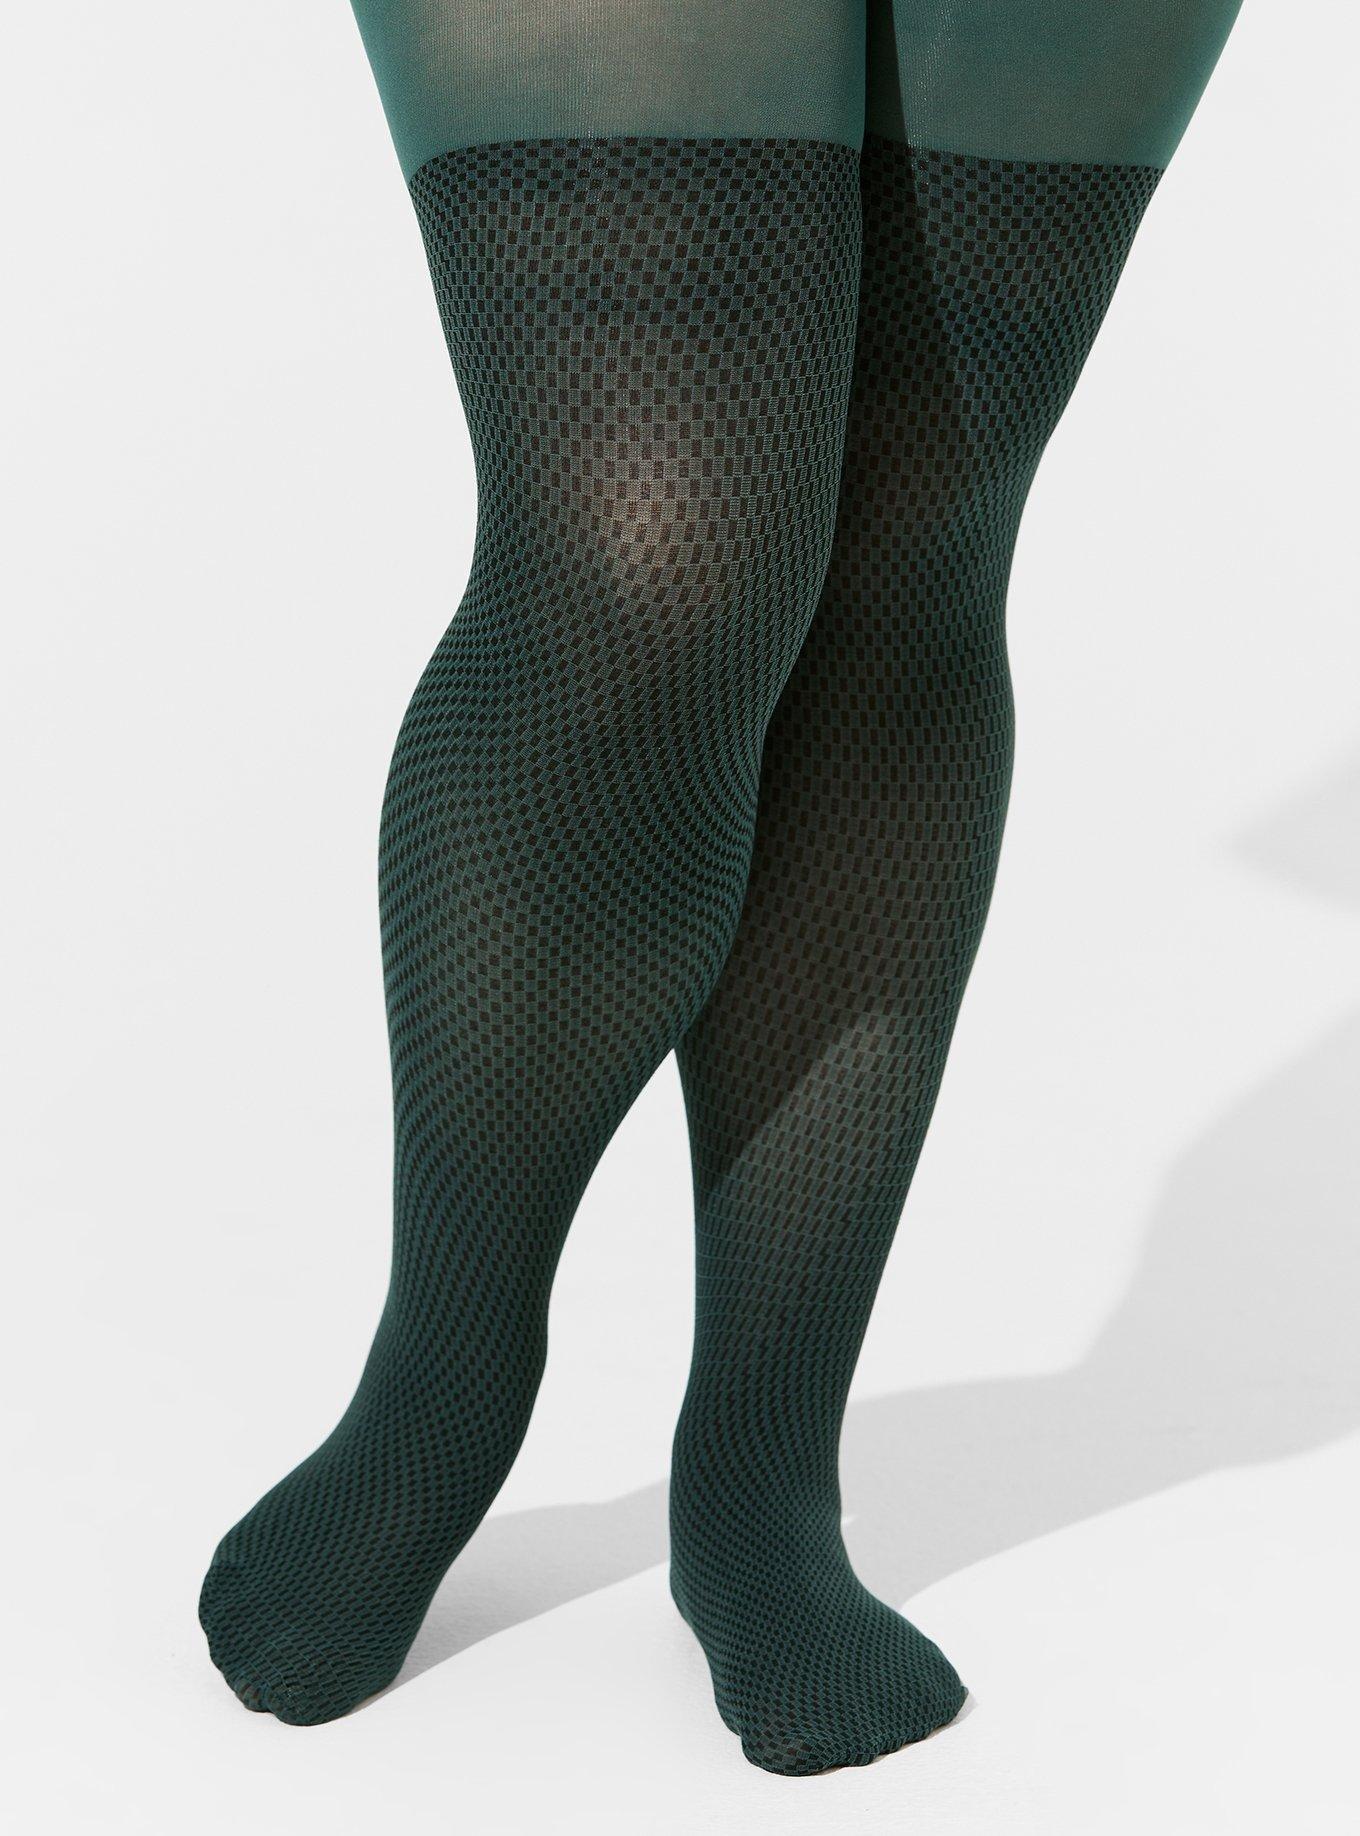 Plus Size - Checkered Tights - Torrid